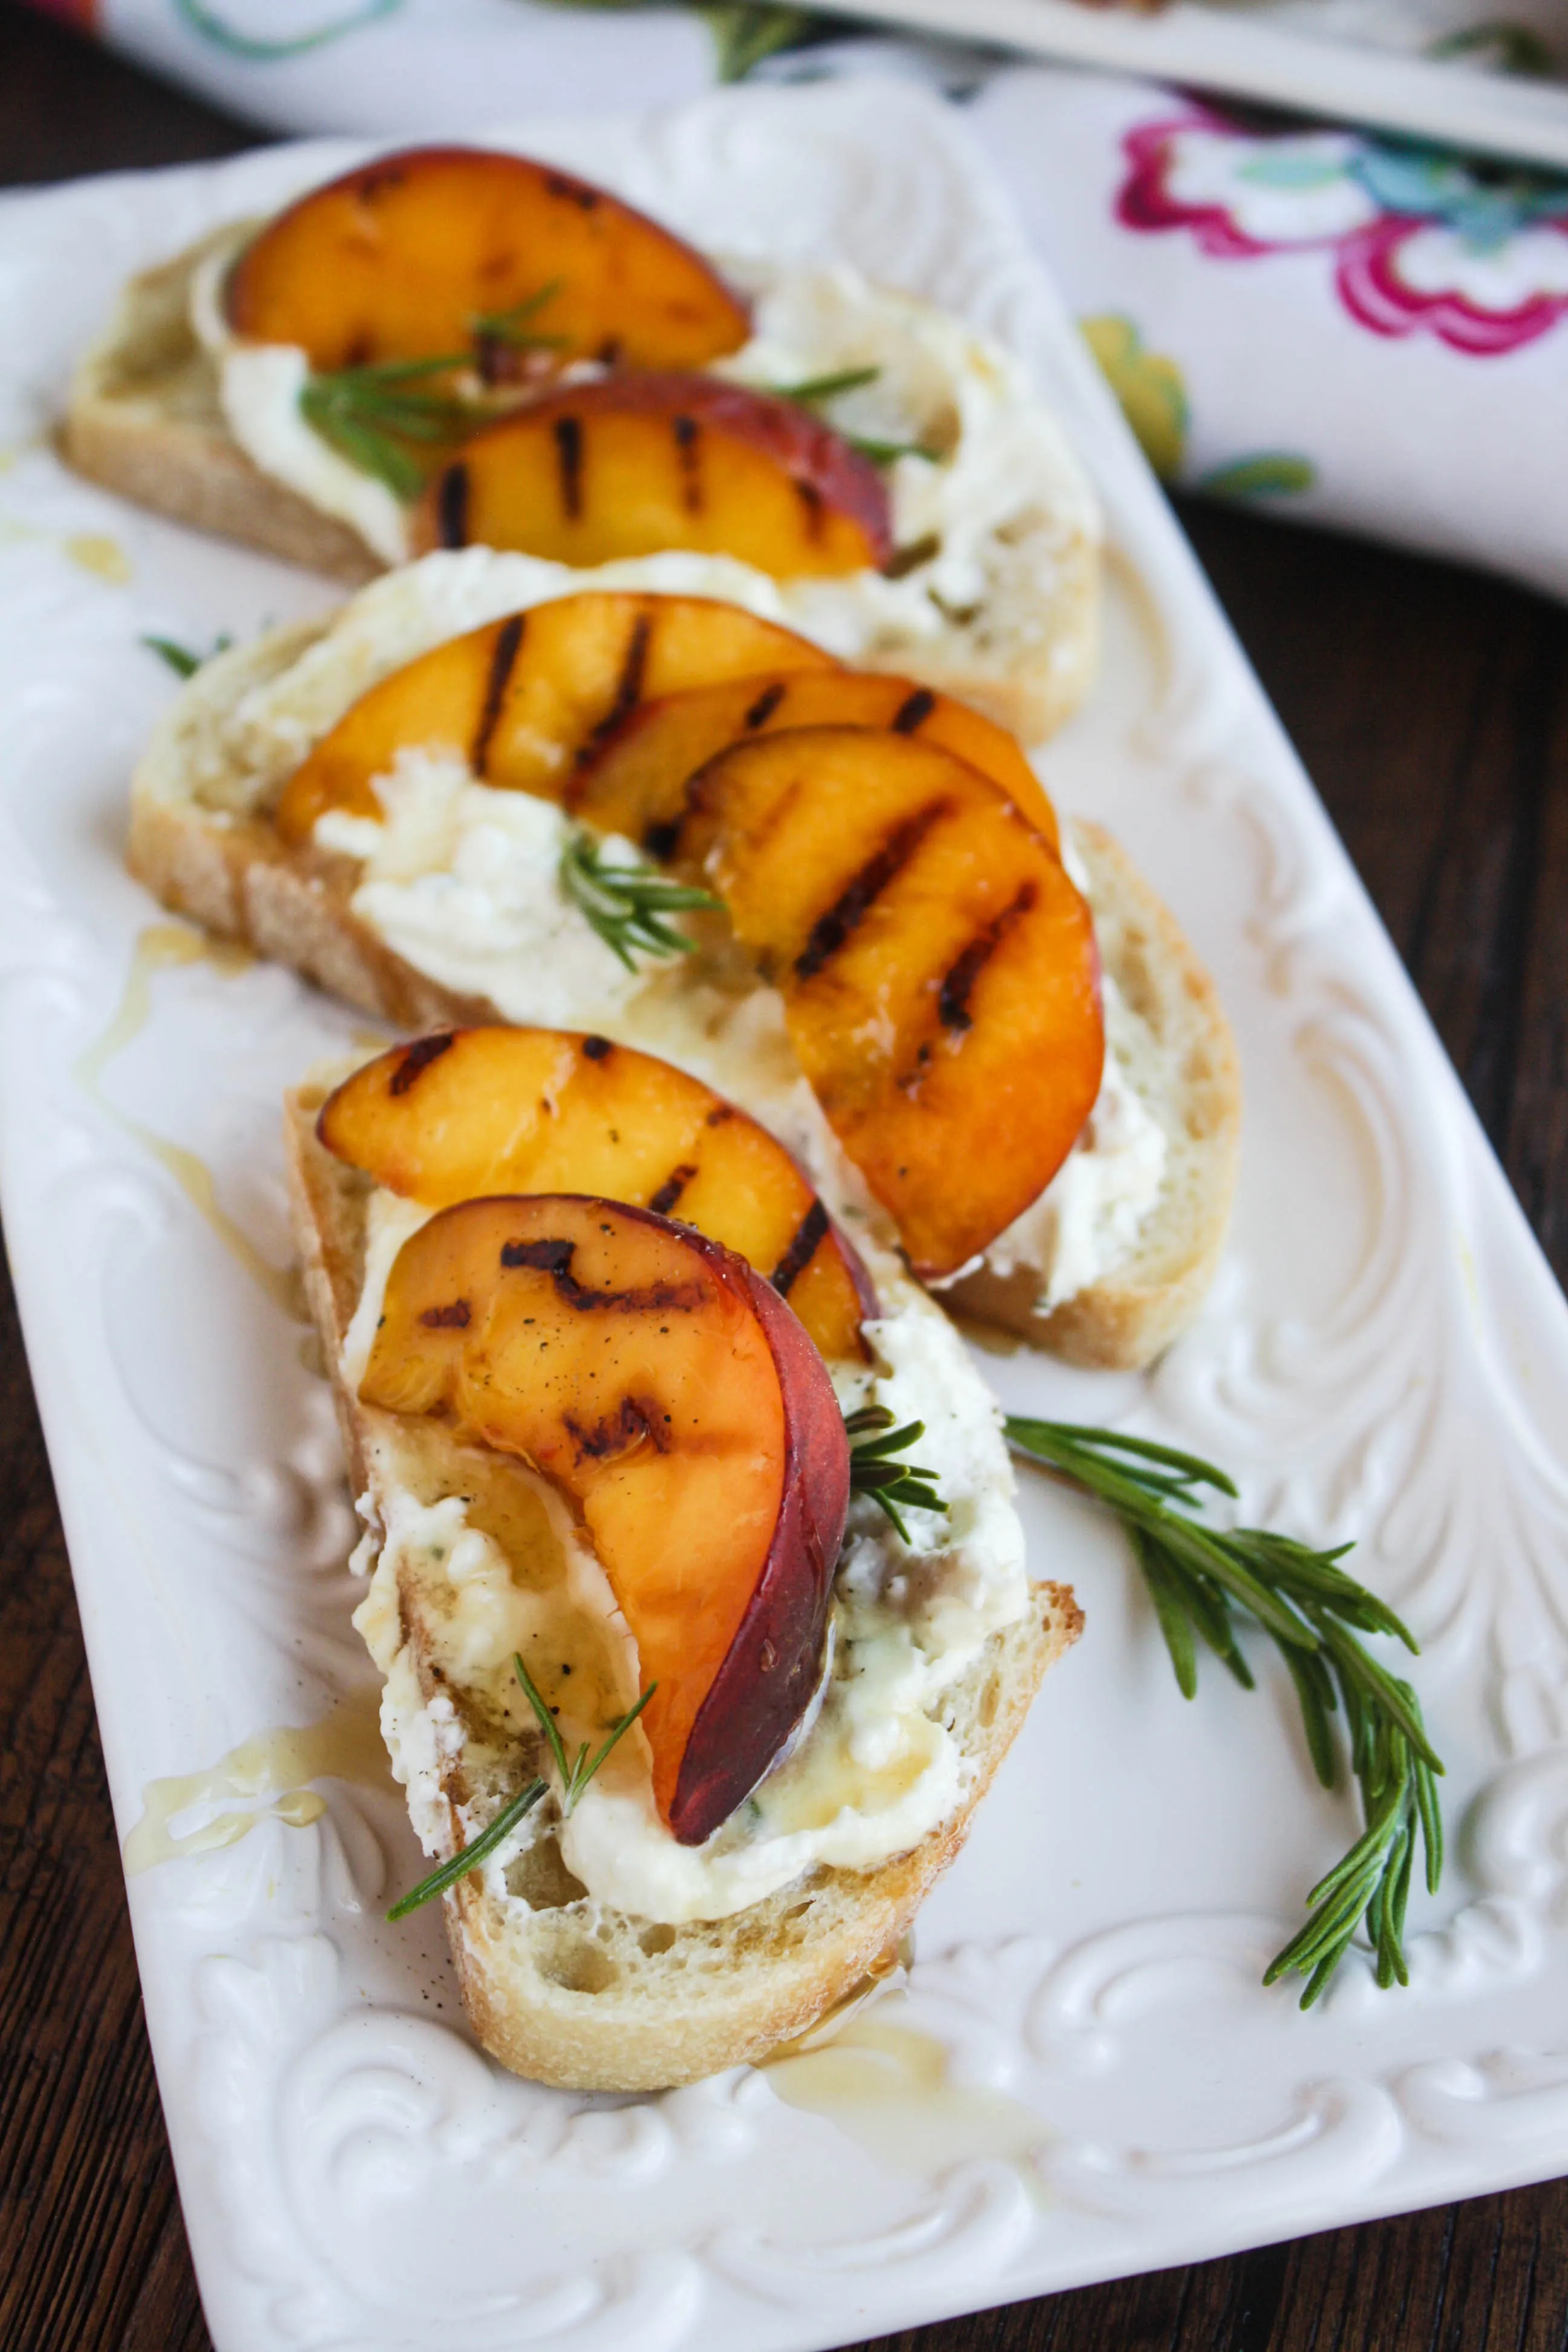 Rosemary Whipped Feta with Grilled Peaches and Honey is a lovely, cheesy appetizer. Serve it at your next party!